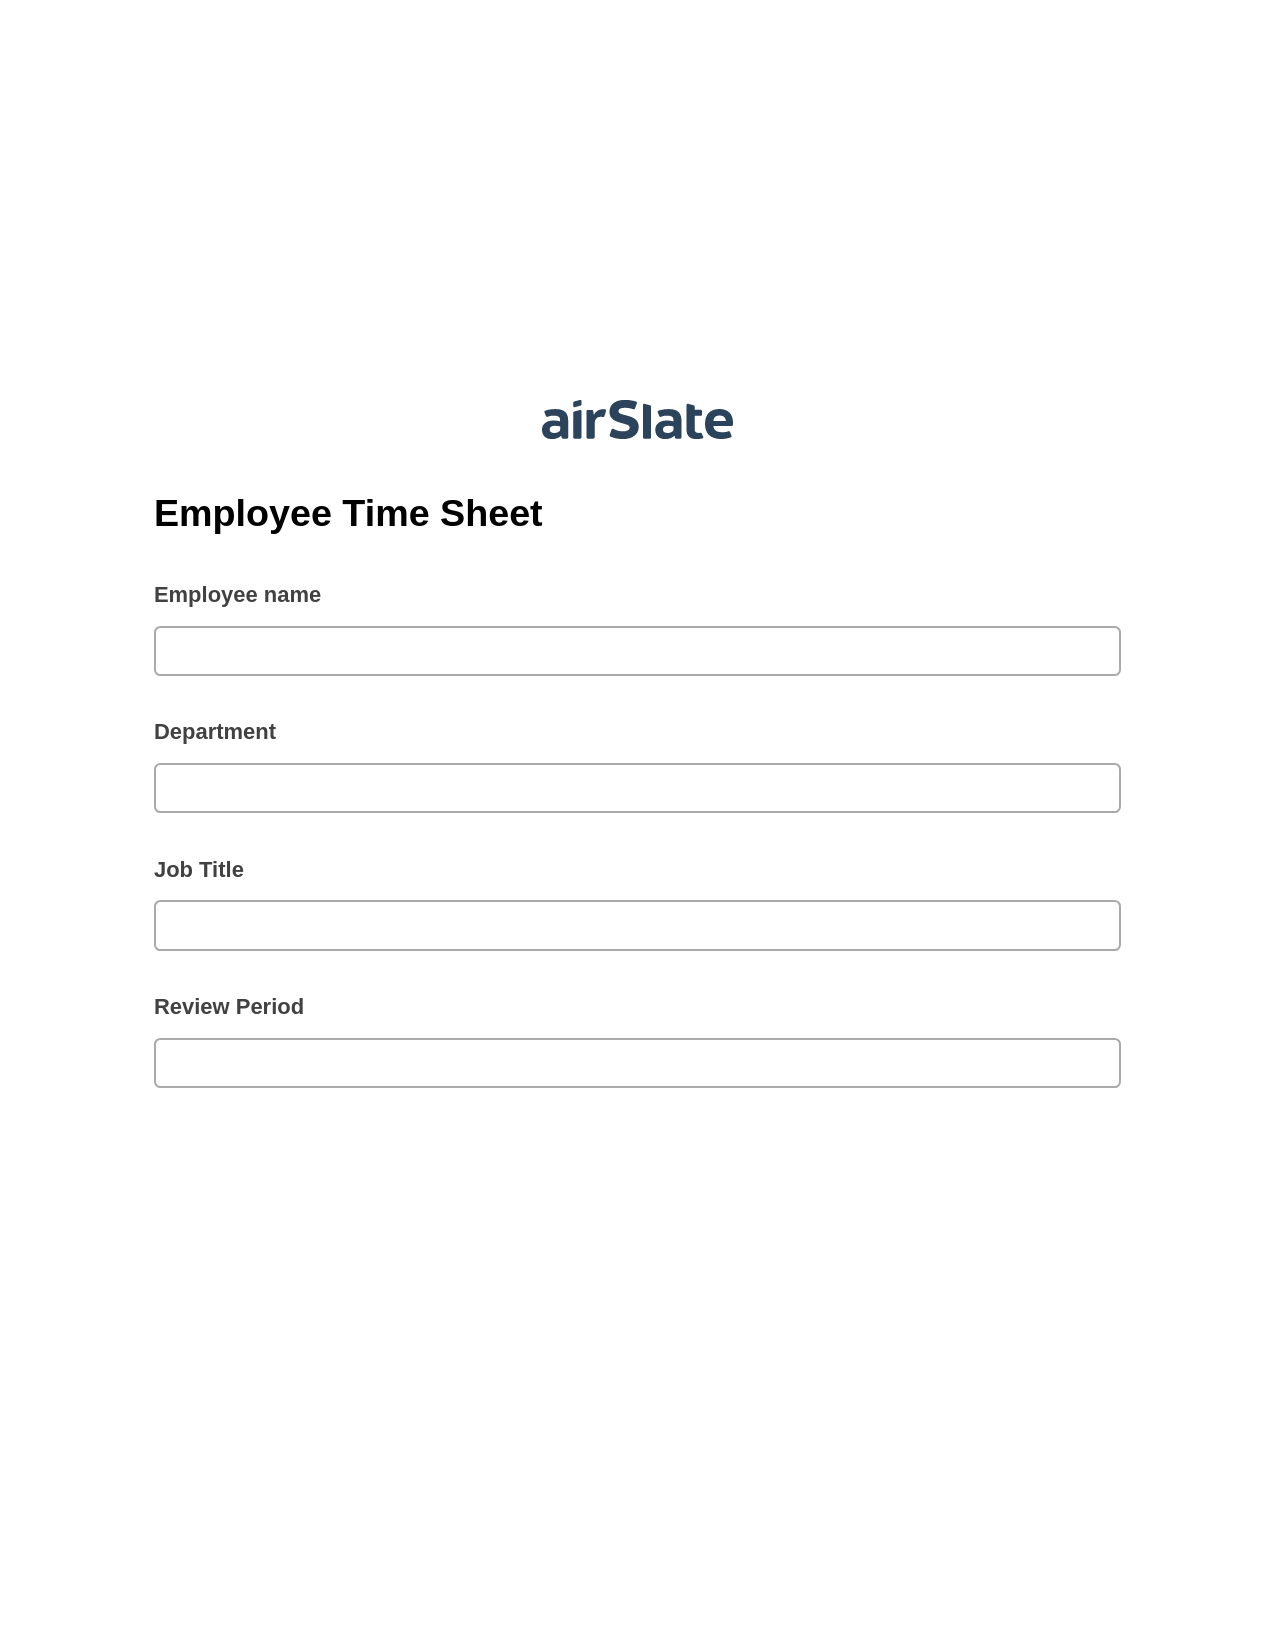 Employee Time Sheet Pre-fill from Salesforce Records Bot, Update Audit Trail Bot, Archive to Box Bot